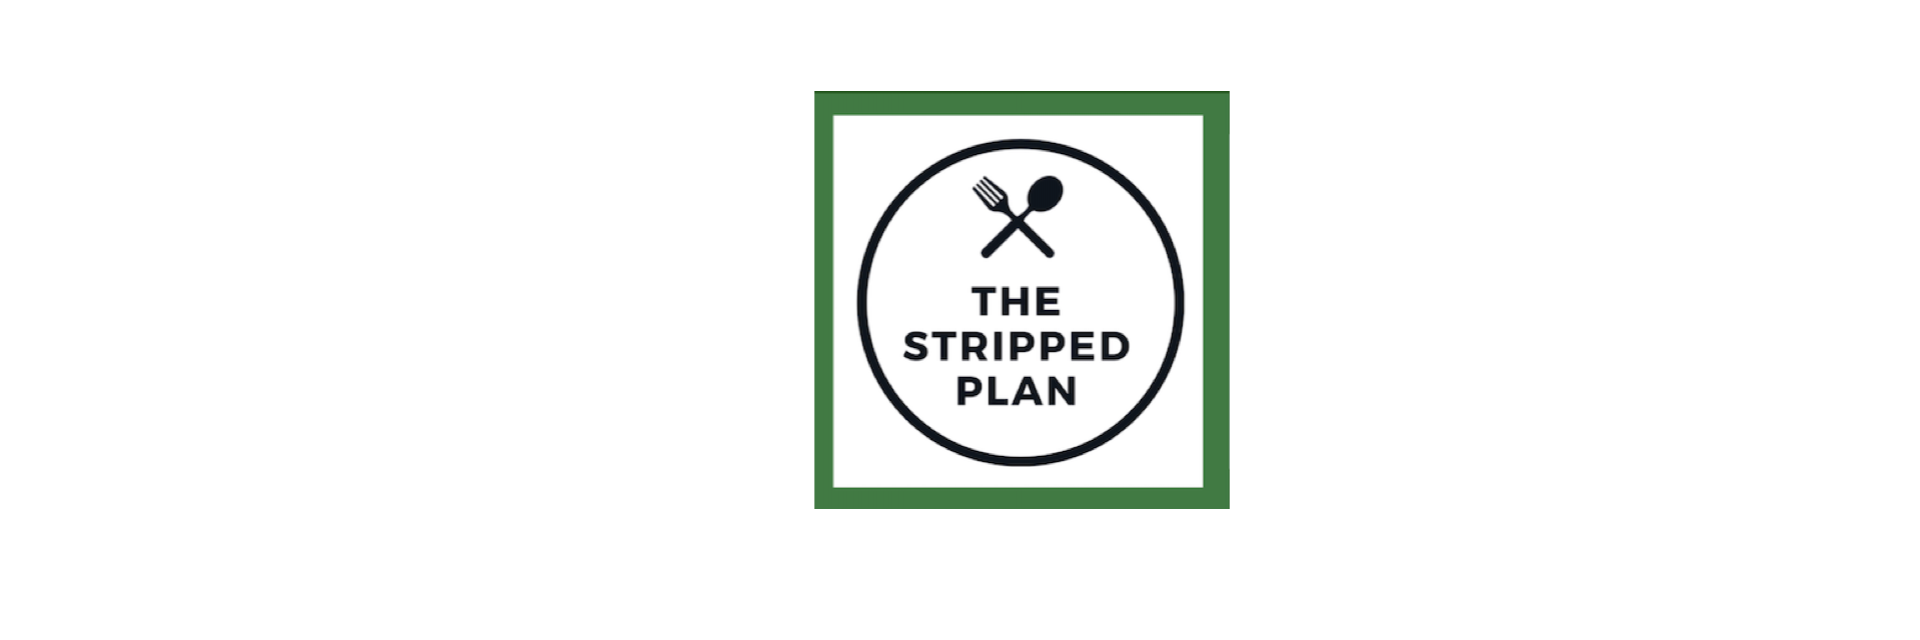 Welcome to The Stripped Plan